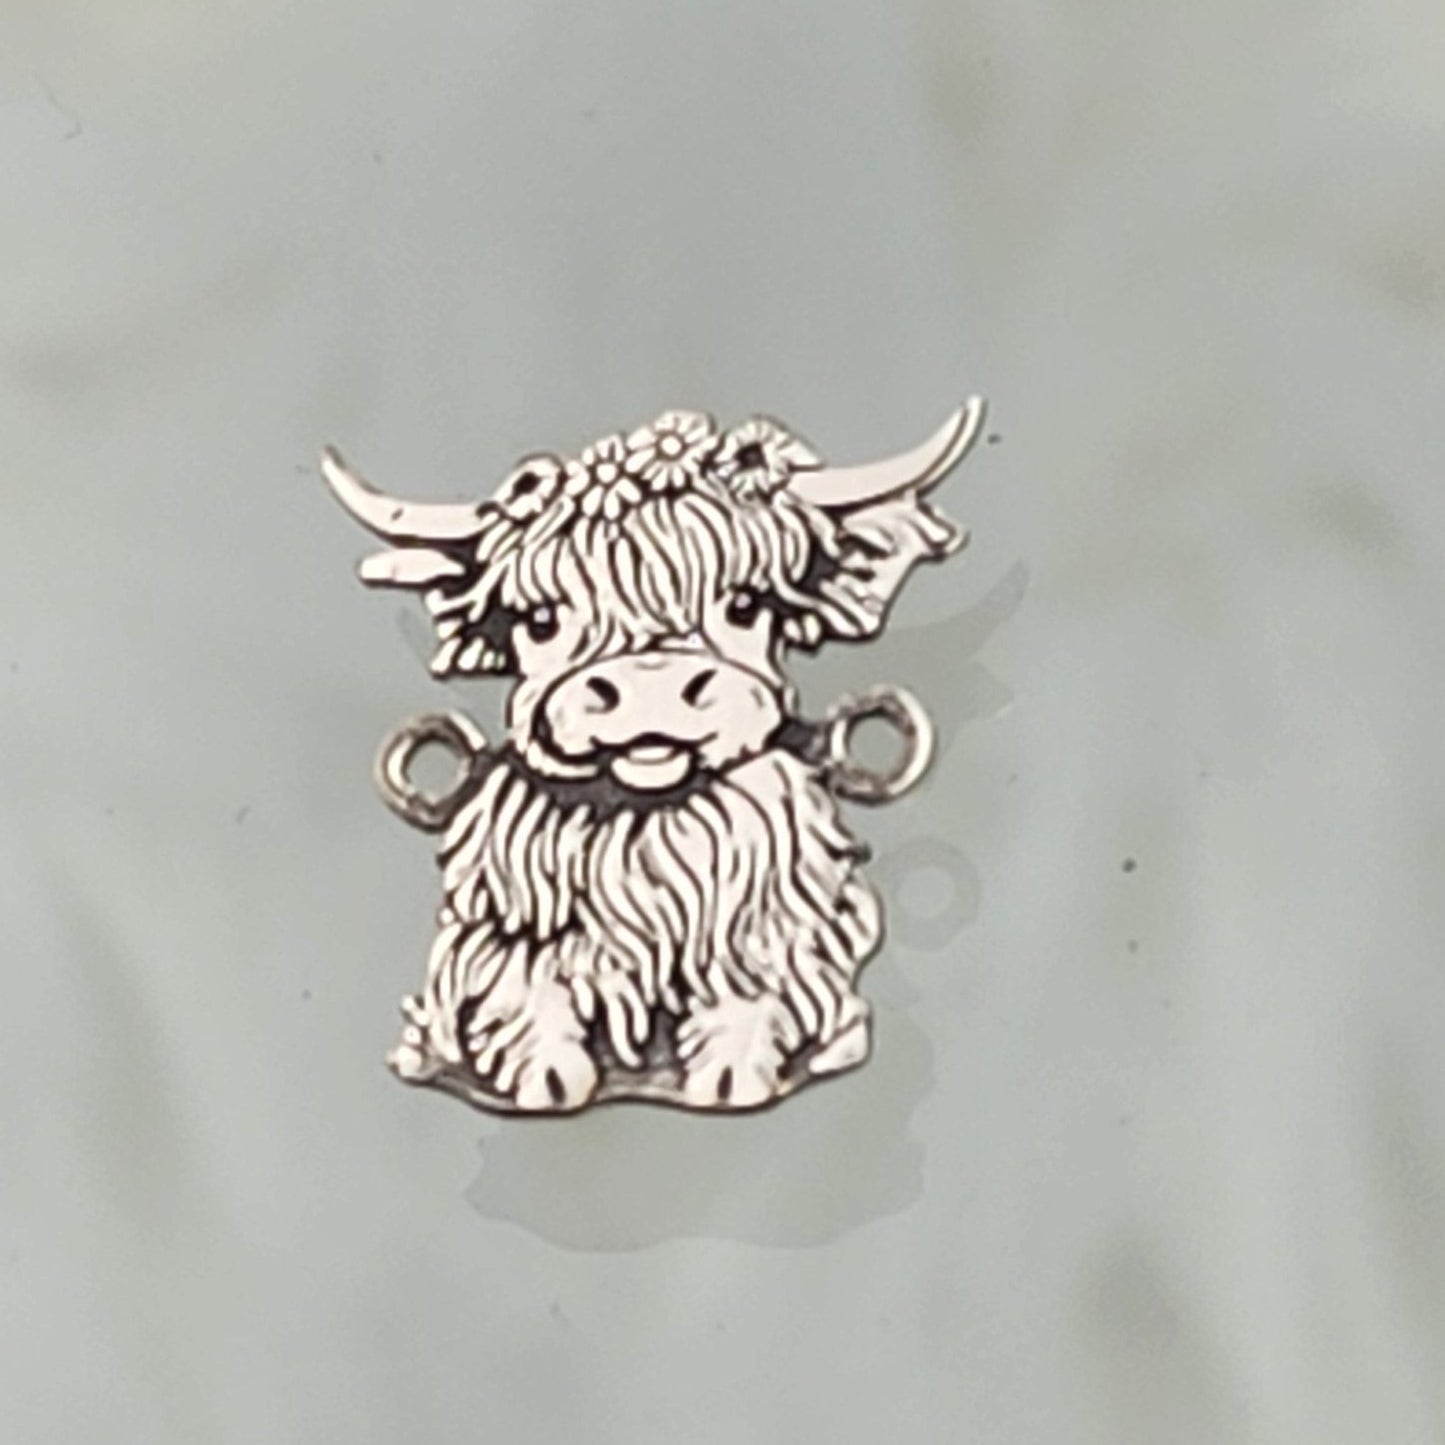 Highland Cow Permanent Jewelry Connector Connector - Sterling Silver, Gold Filled or 14k Gold